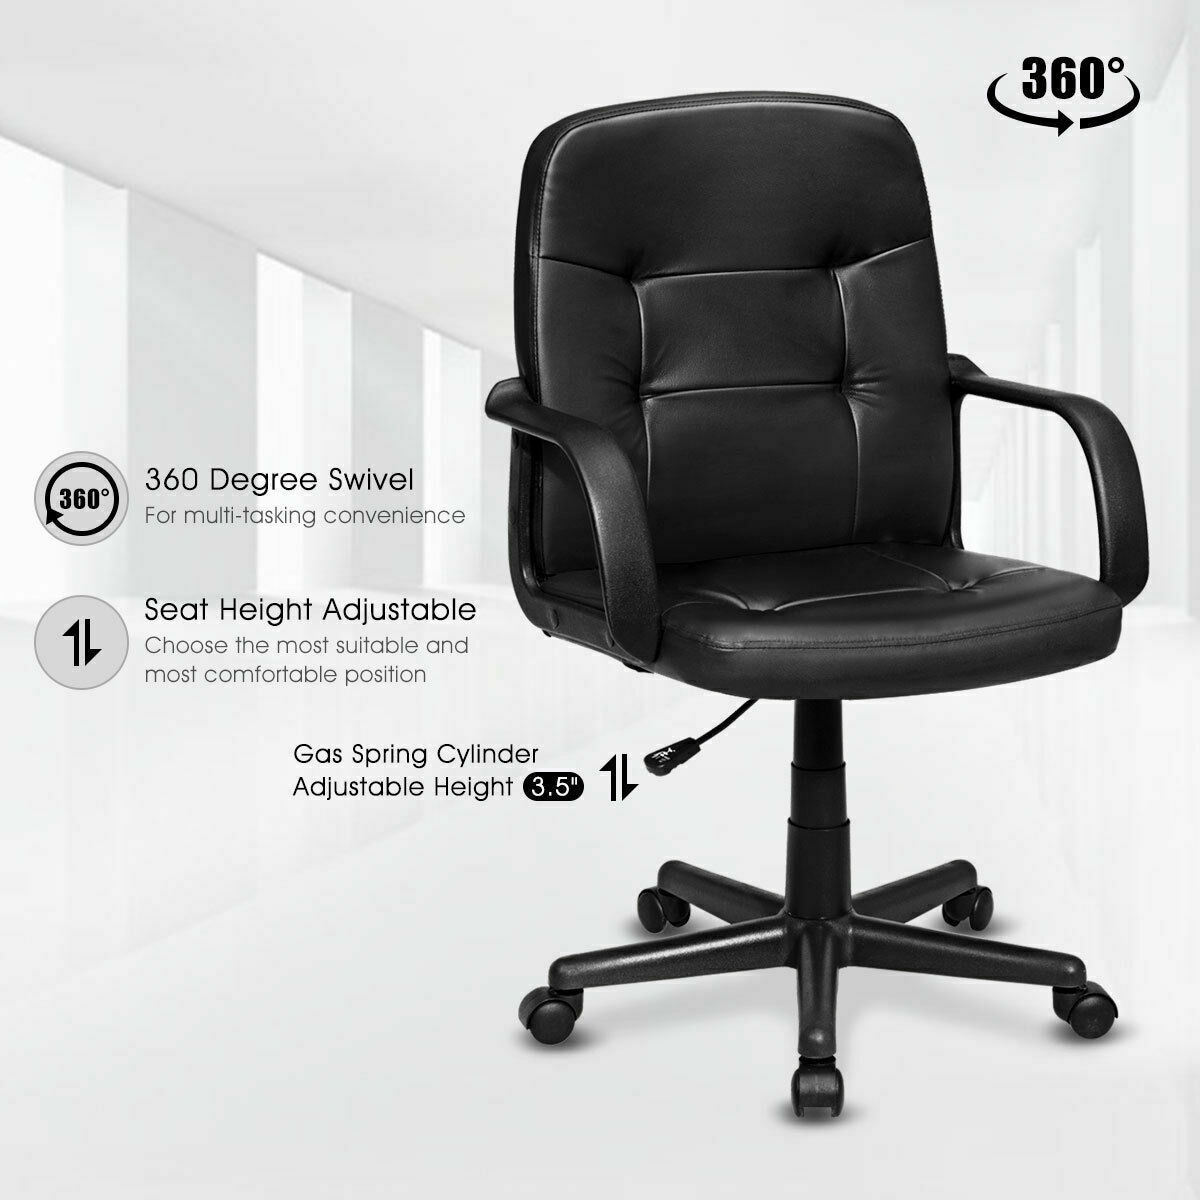 Executive Office Height Adjustable Chair Kids Computer Desk Padded Seat Backrest 